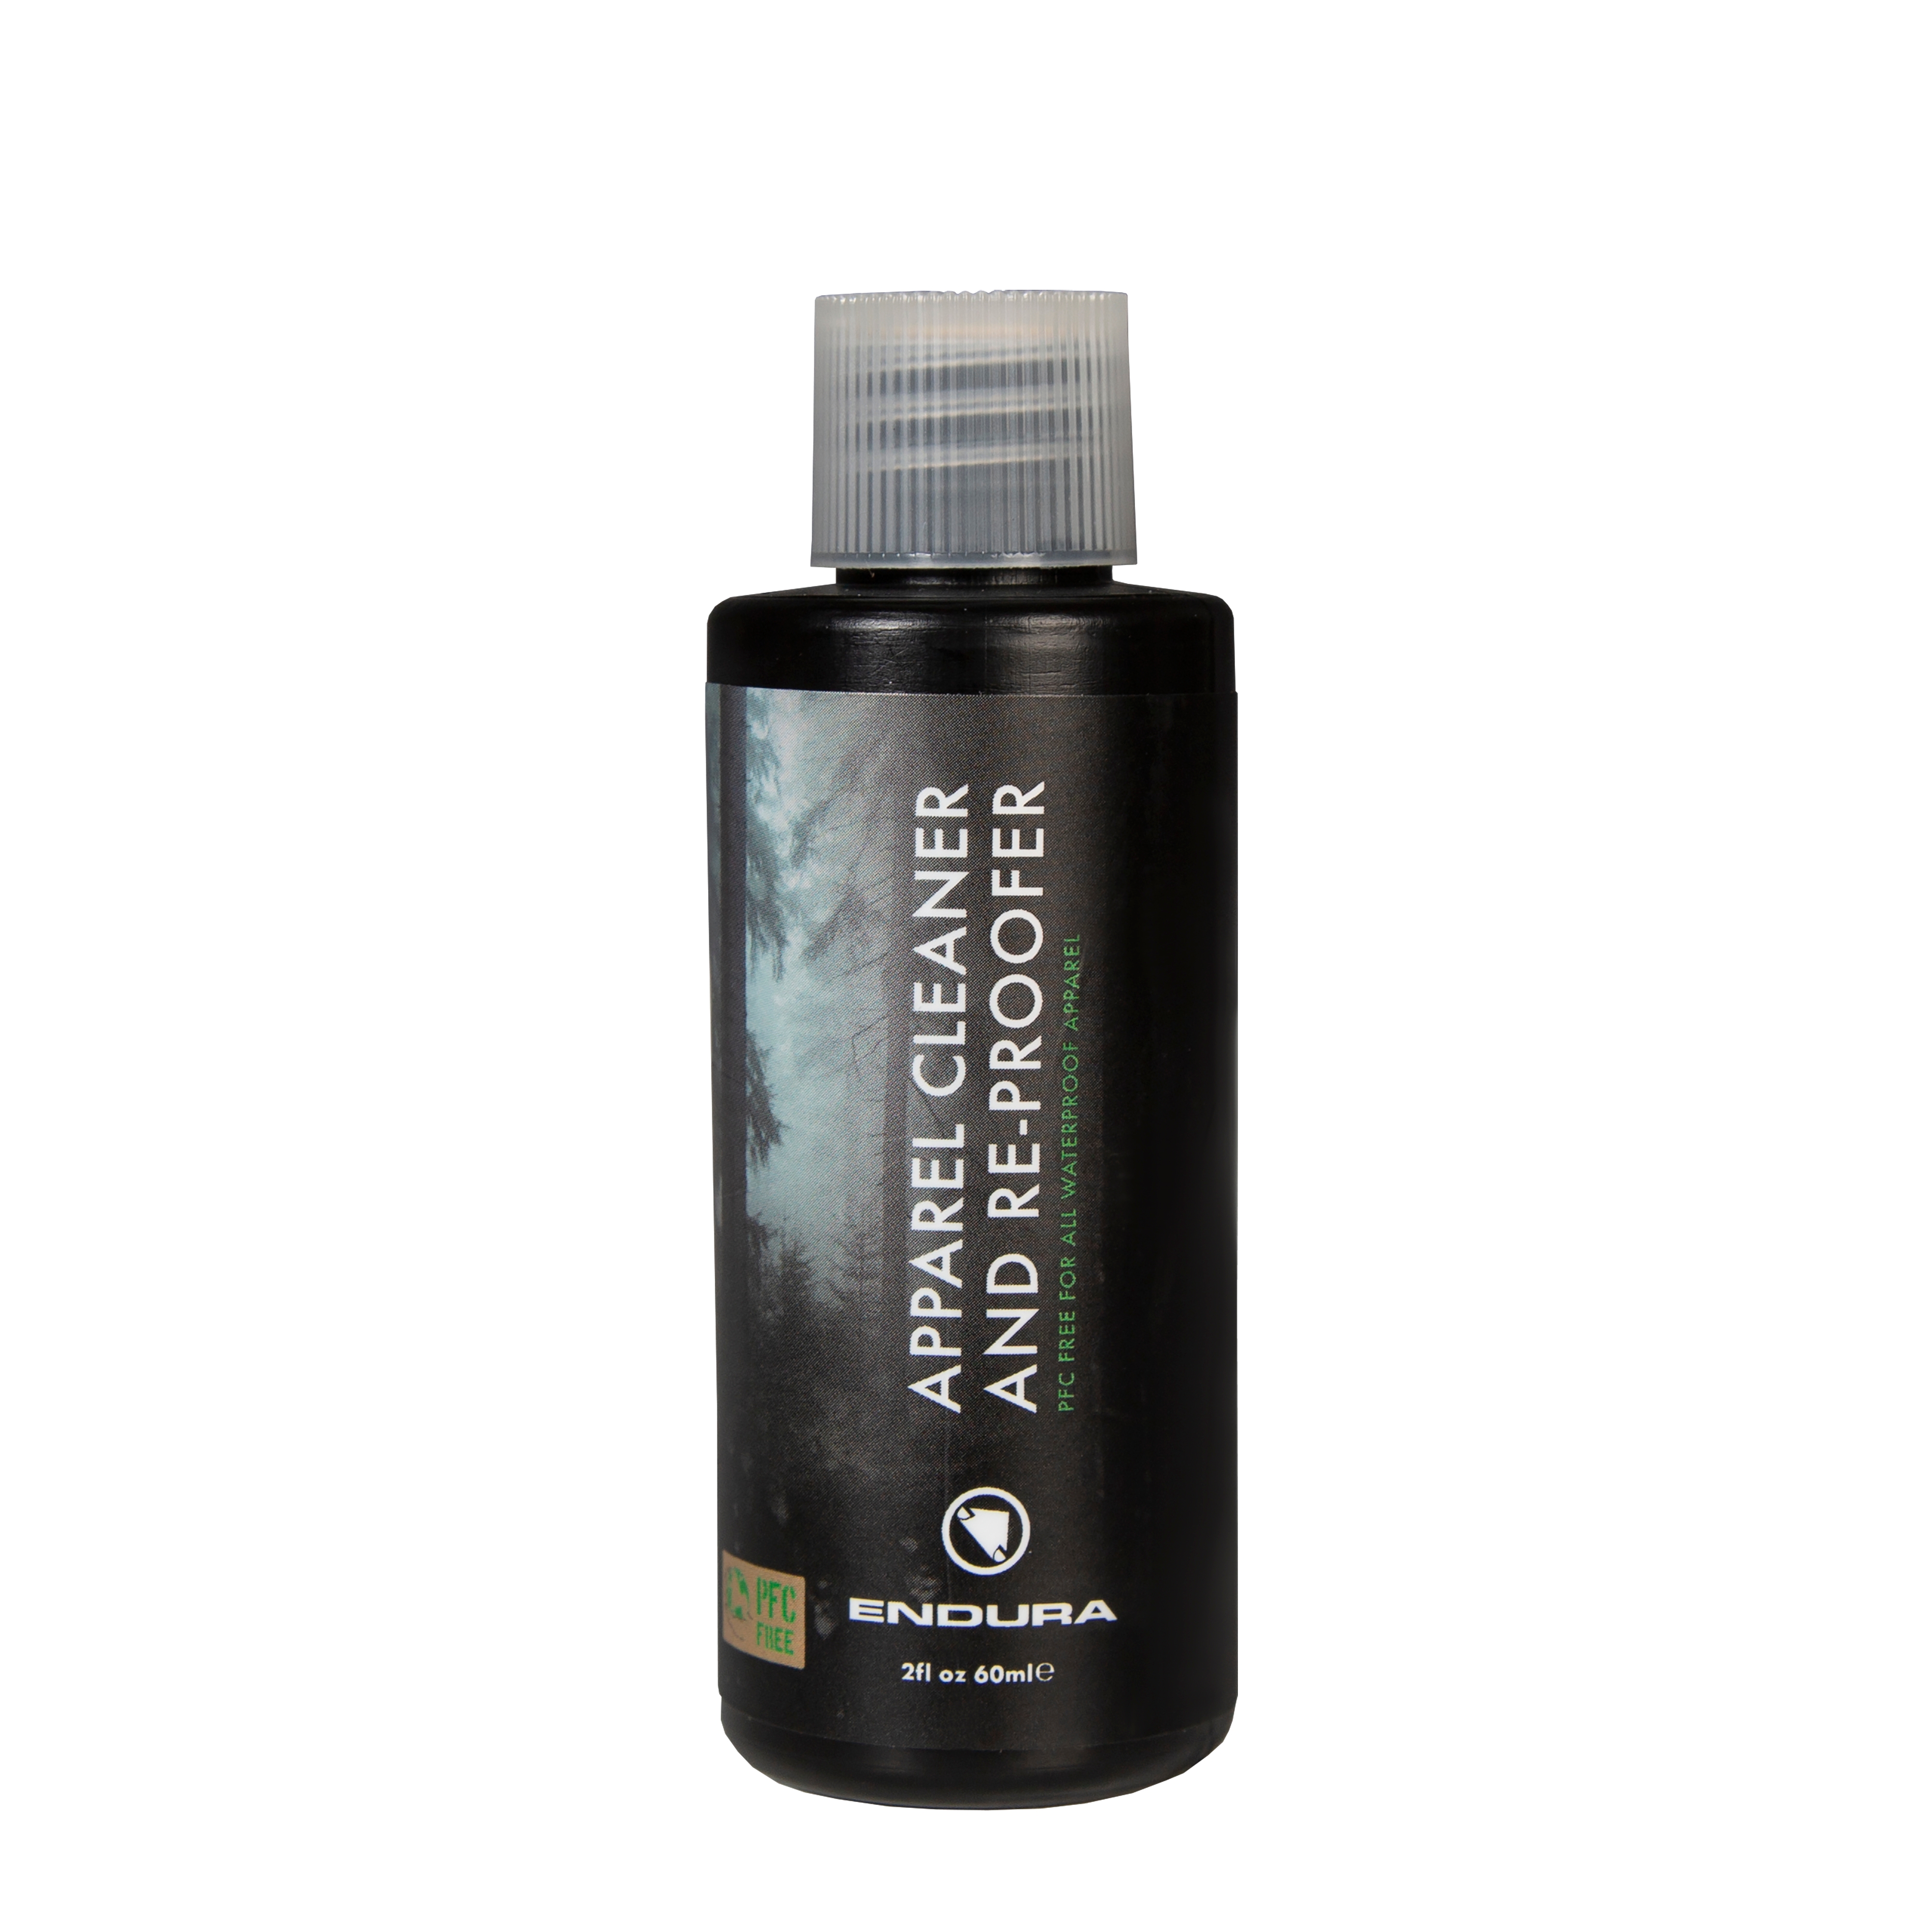 Endura Apparel Cleaner and Re-proofer 60ml